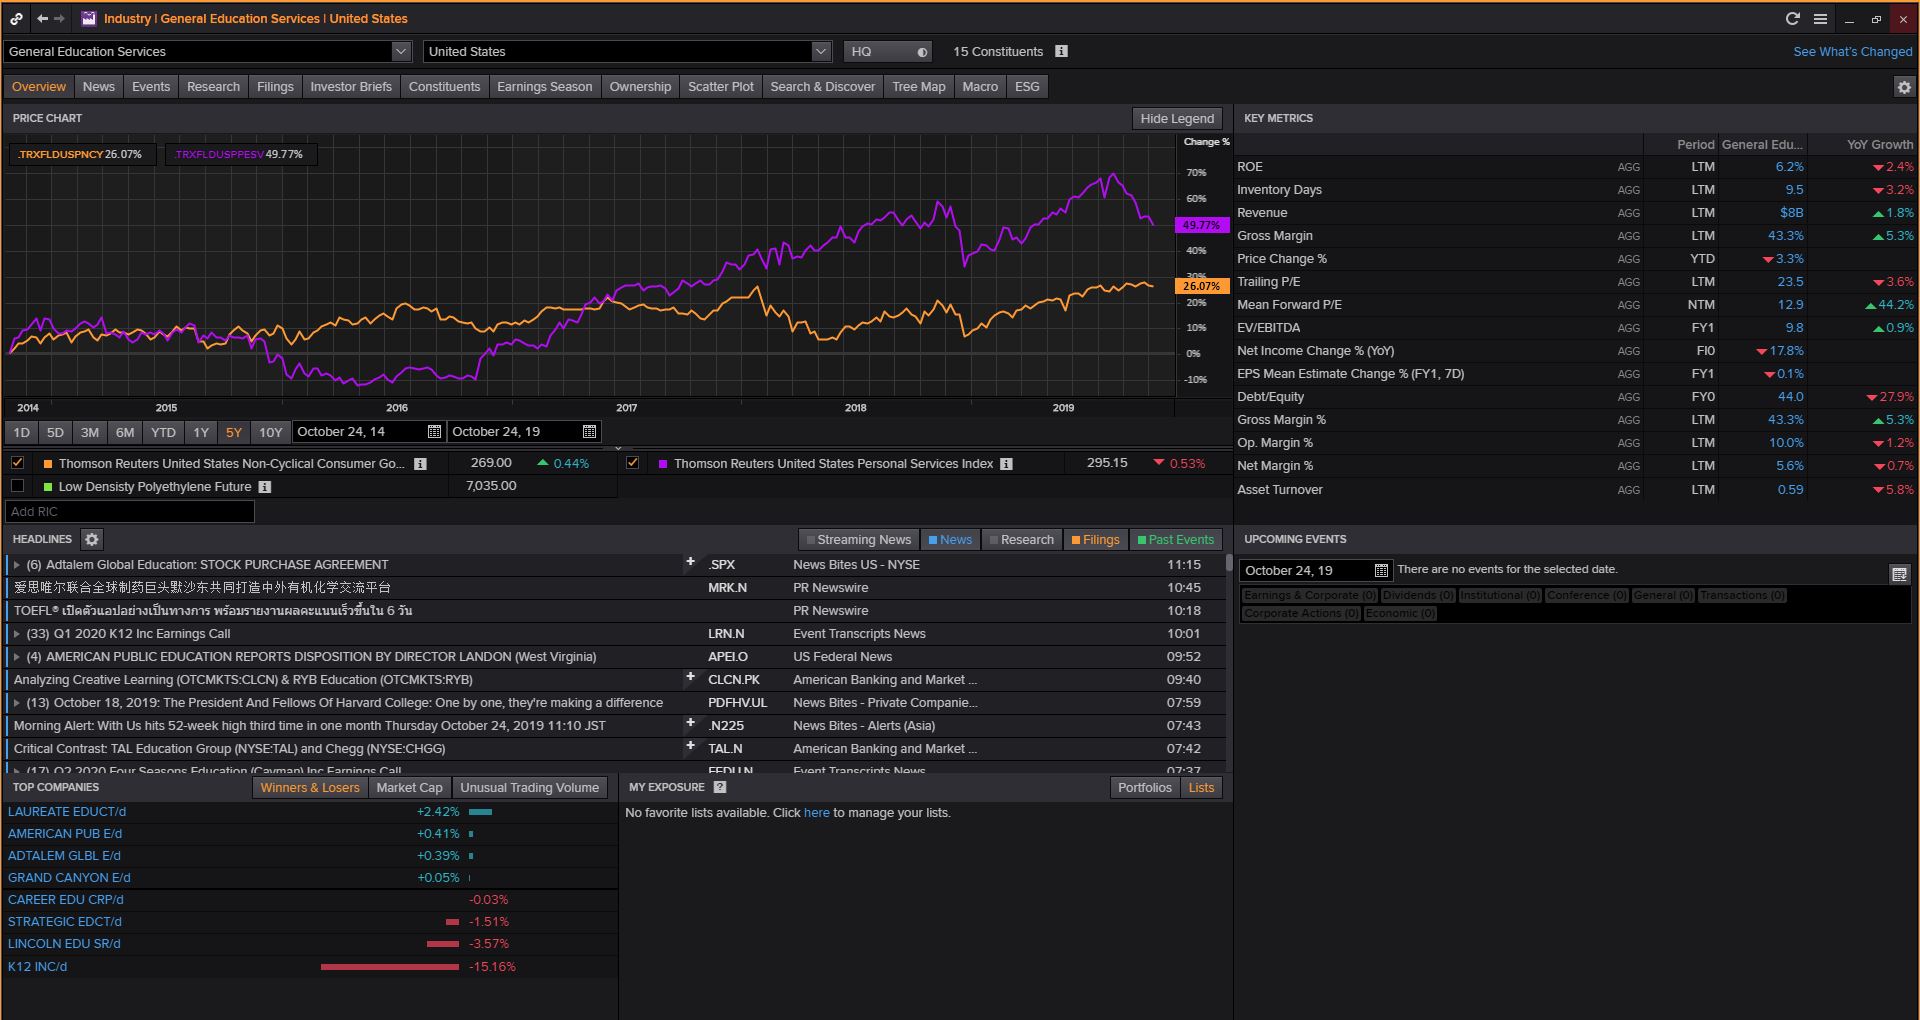 Login to Thomson Reuters Eikon (Available Only in Library) then Type INDUS and Search and Search for Education and Click on Required Industry and Select Country 